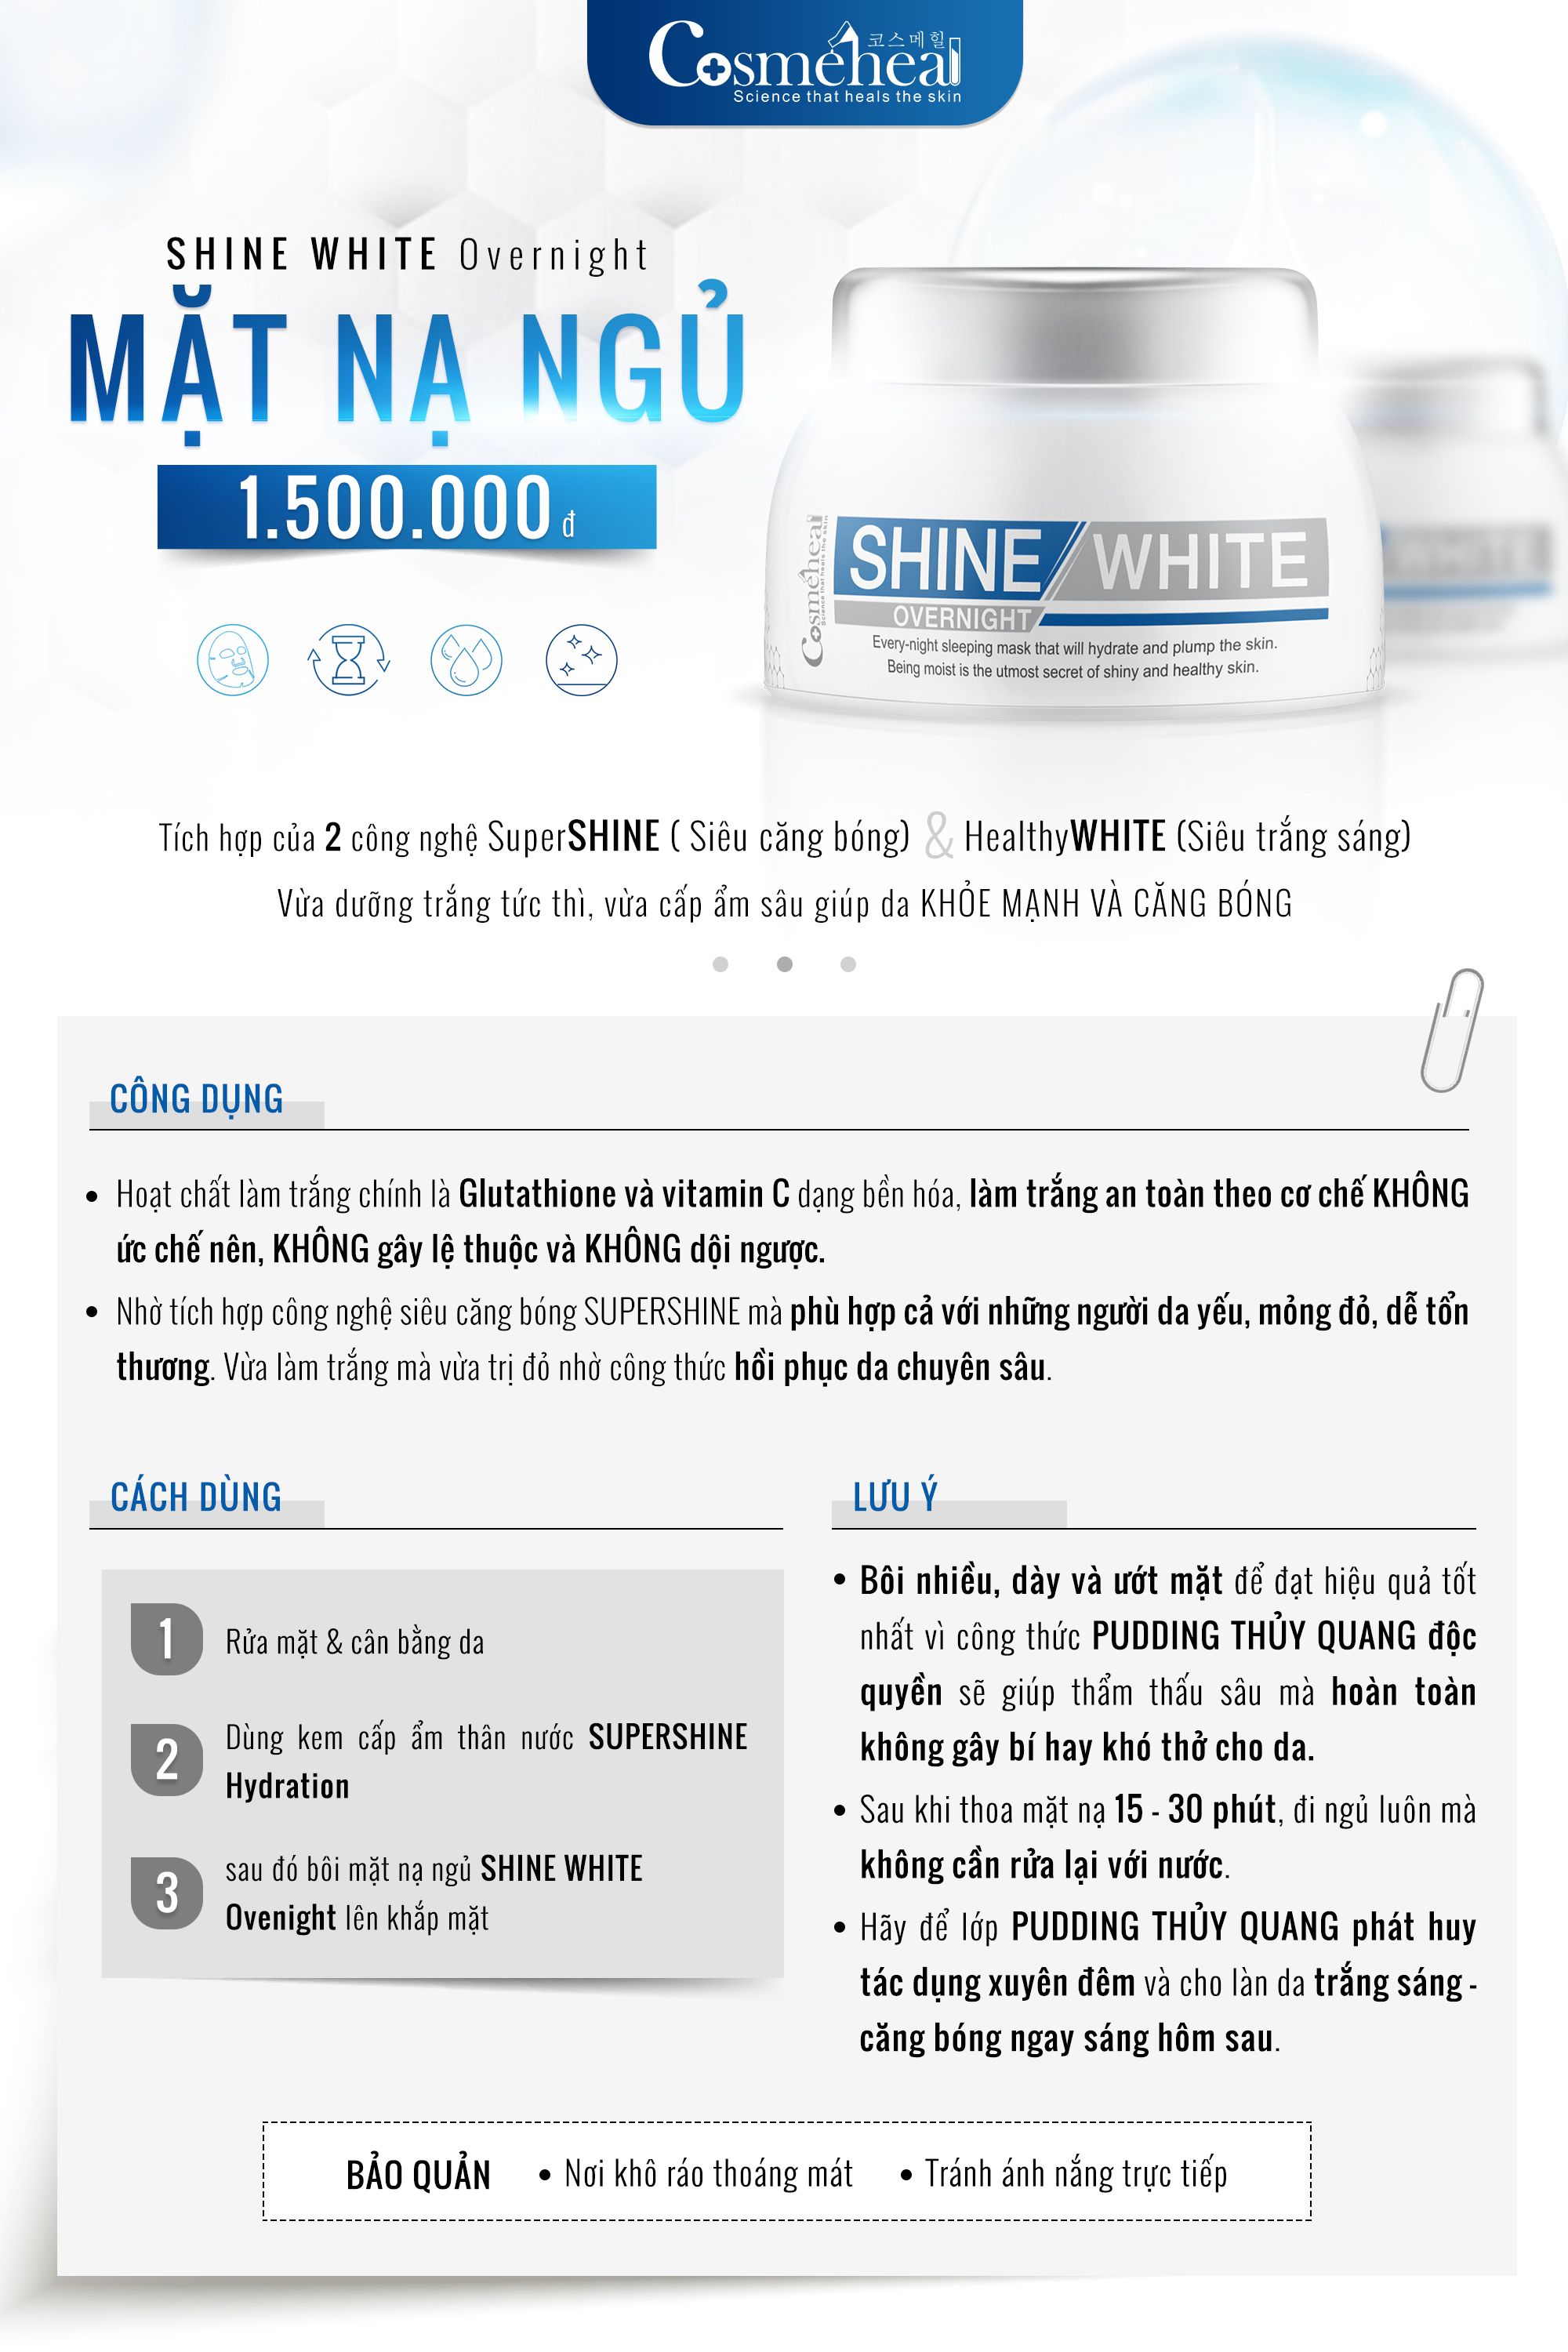 Mặt nạ ngủ Shine White Over Night